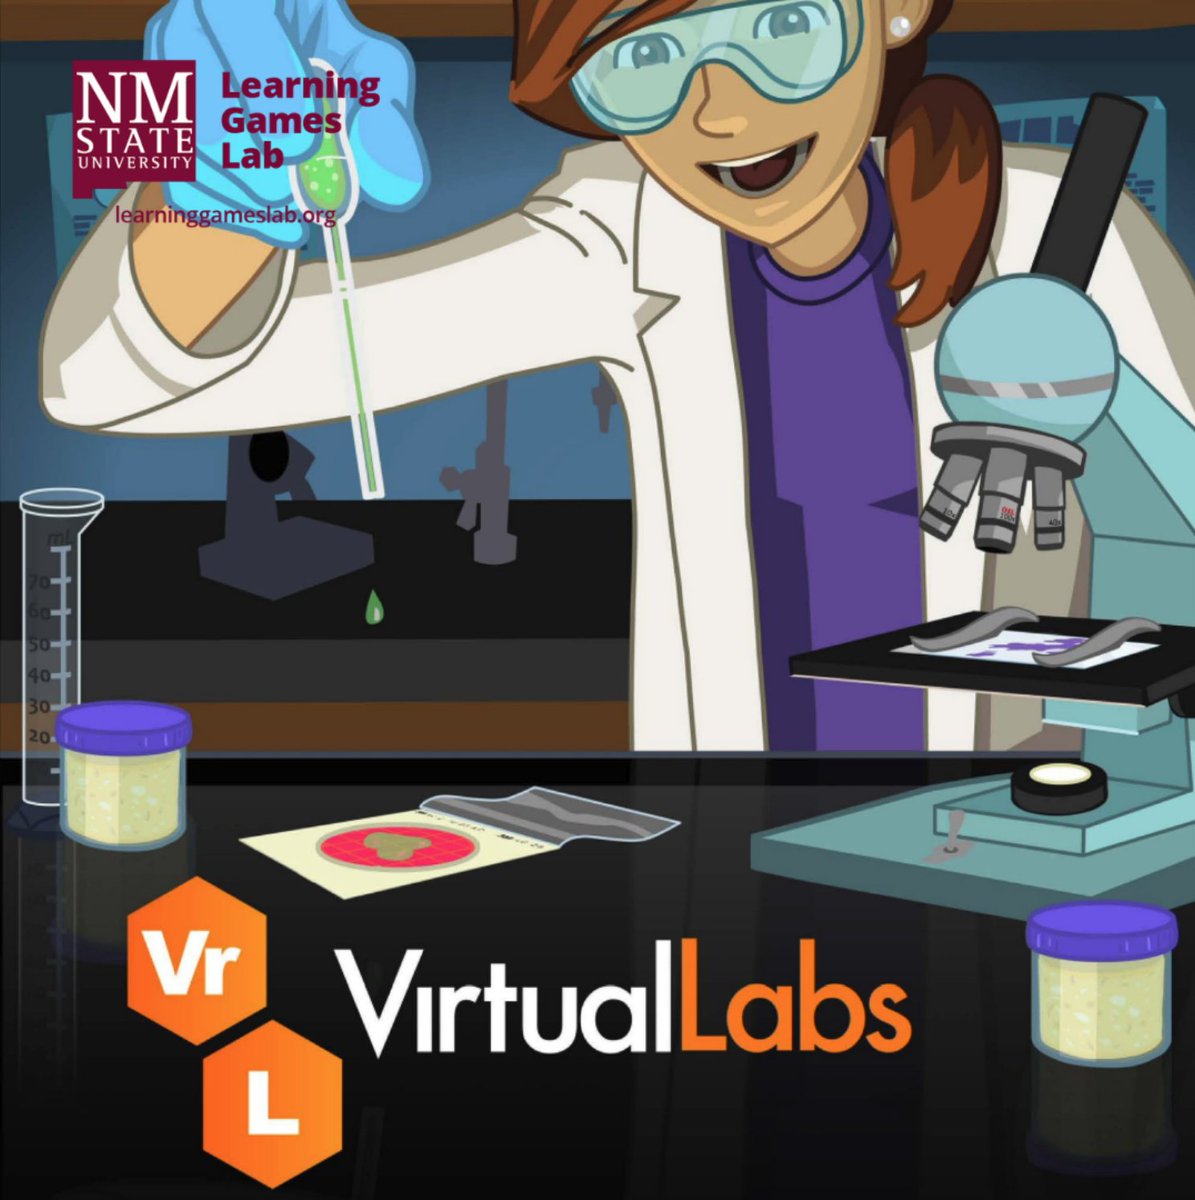 Interactive food science modules train high school and college students in laboratory skills and concepts relevant to food science, including using a microscope, testing for aflatoxin, culturing bacteria, and measuring pH. #labs #educationaltools virtuallabs.nmsu.edu